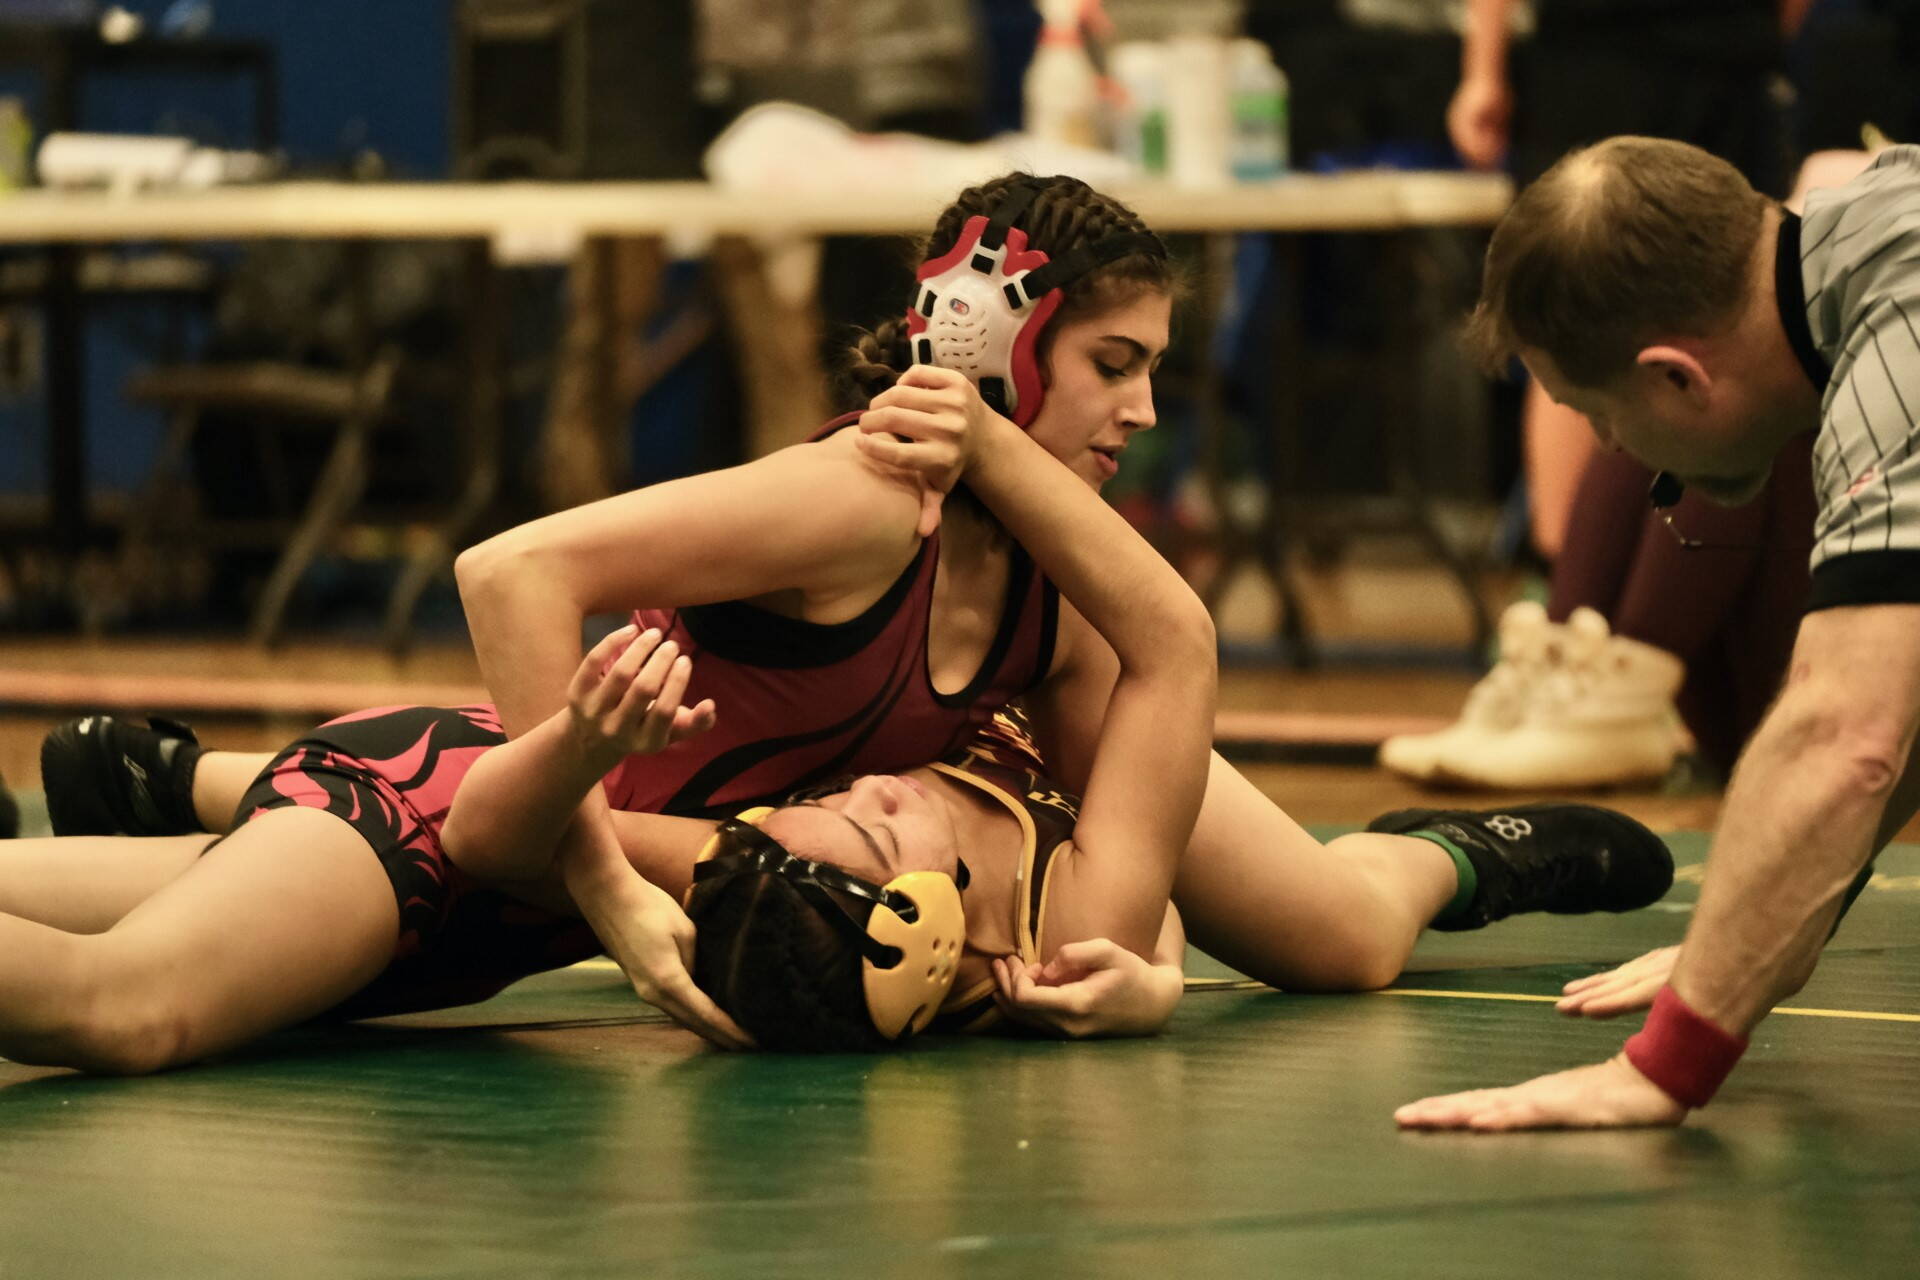 Wrangell junior Della Churchill pins Mt. Edgecumbe junior Nevaeh George in the girls 114-pound championship match of the 2023 ASAA Region V wrestling tournament Saturday at Thunder Mountain High School. Churchill was selected the Girls Outstanding Wrestler in the tournament. (Klas Stolpe/ For the Juneau Empire)